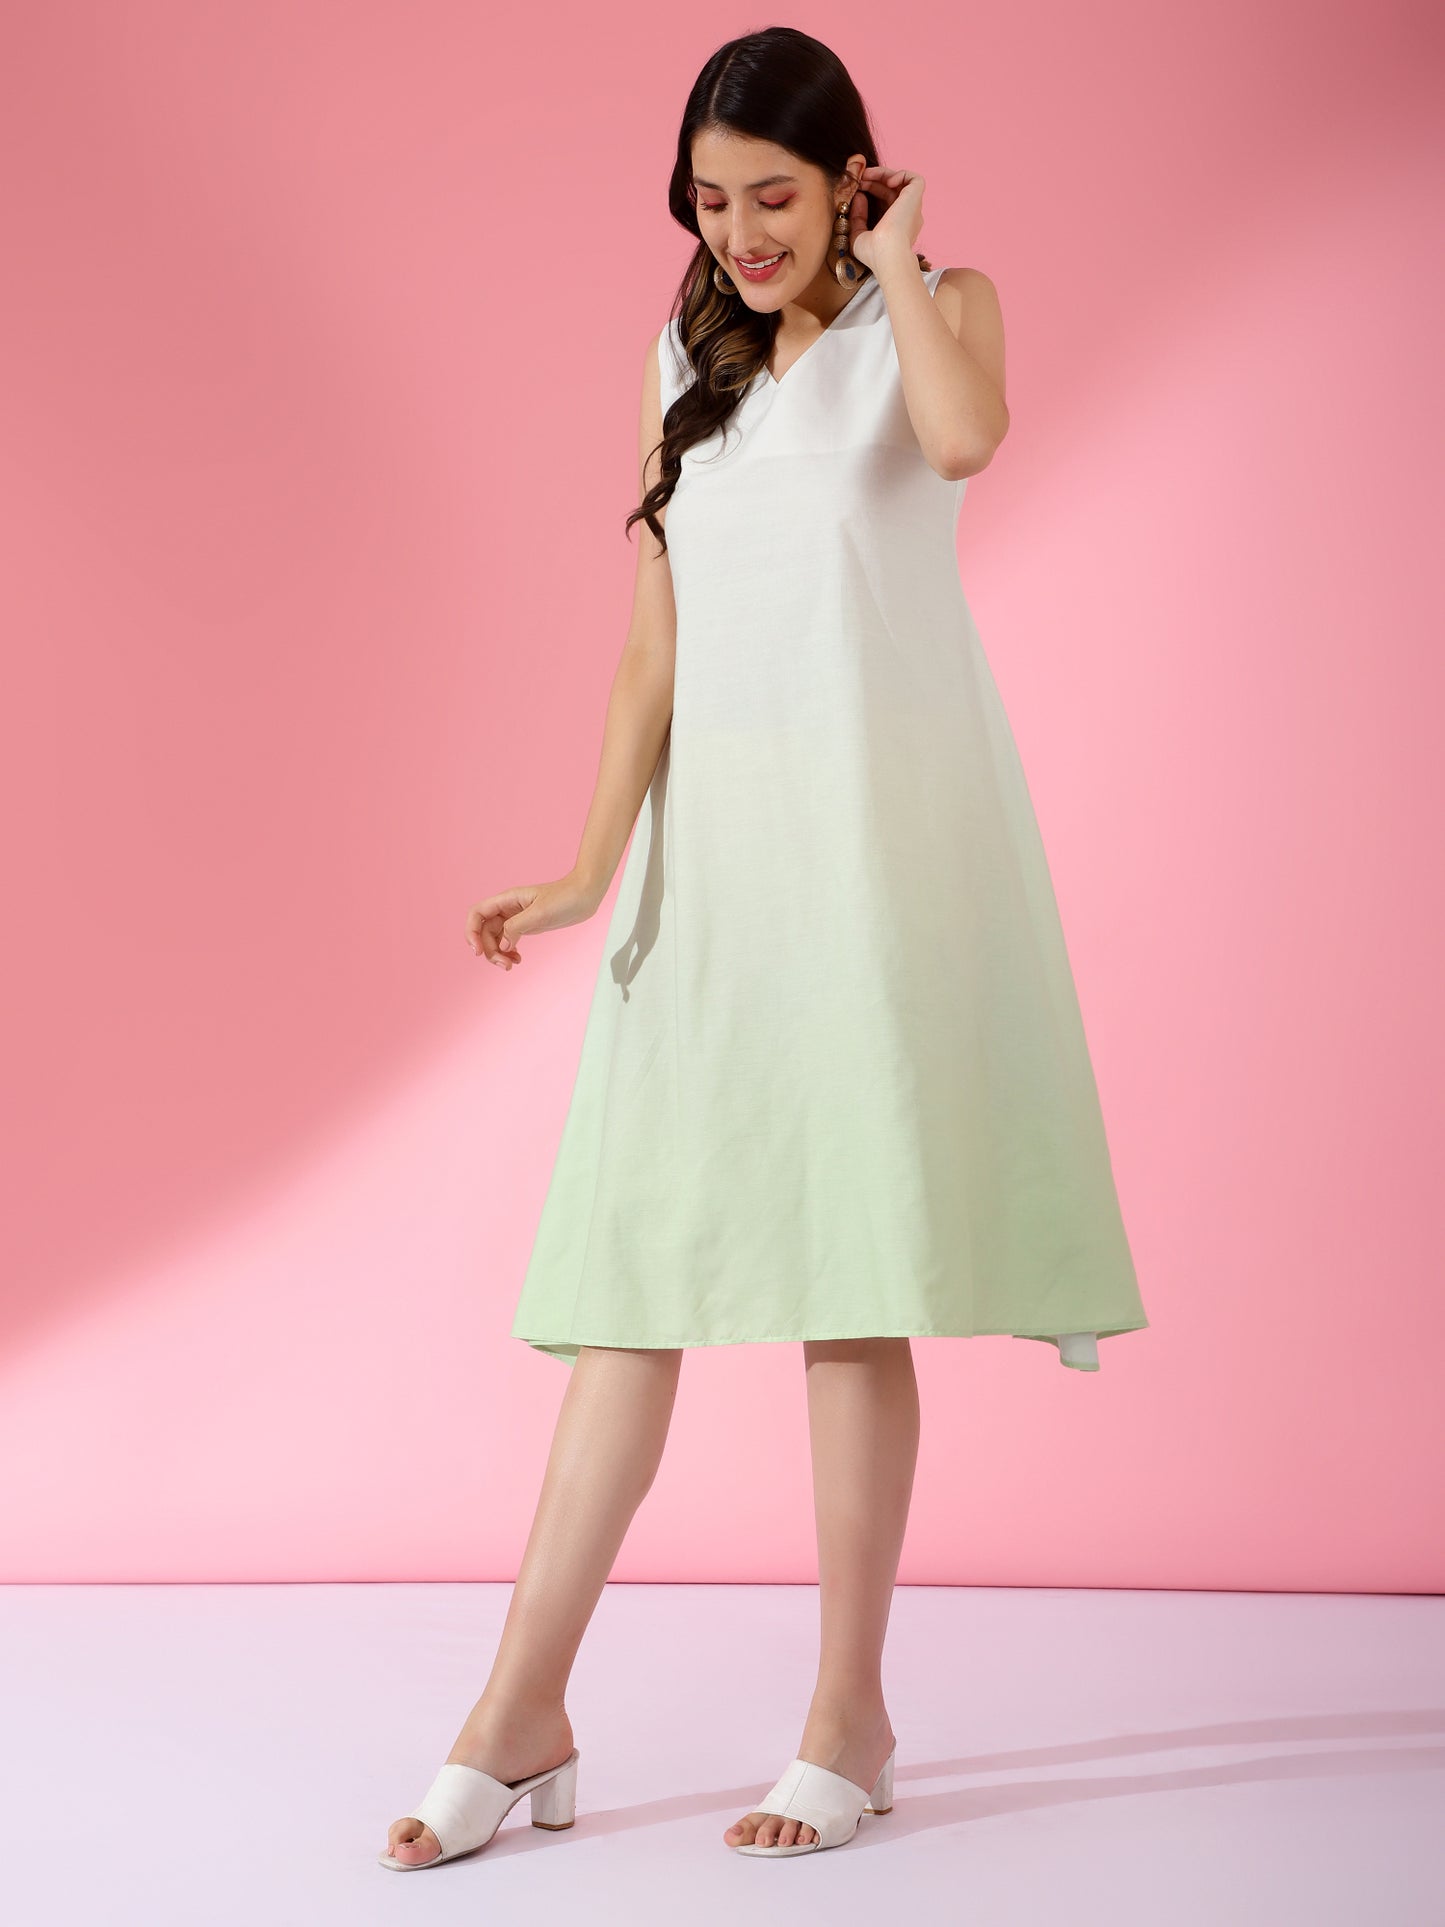 Misty Mountains Ombre Dress